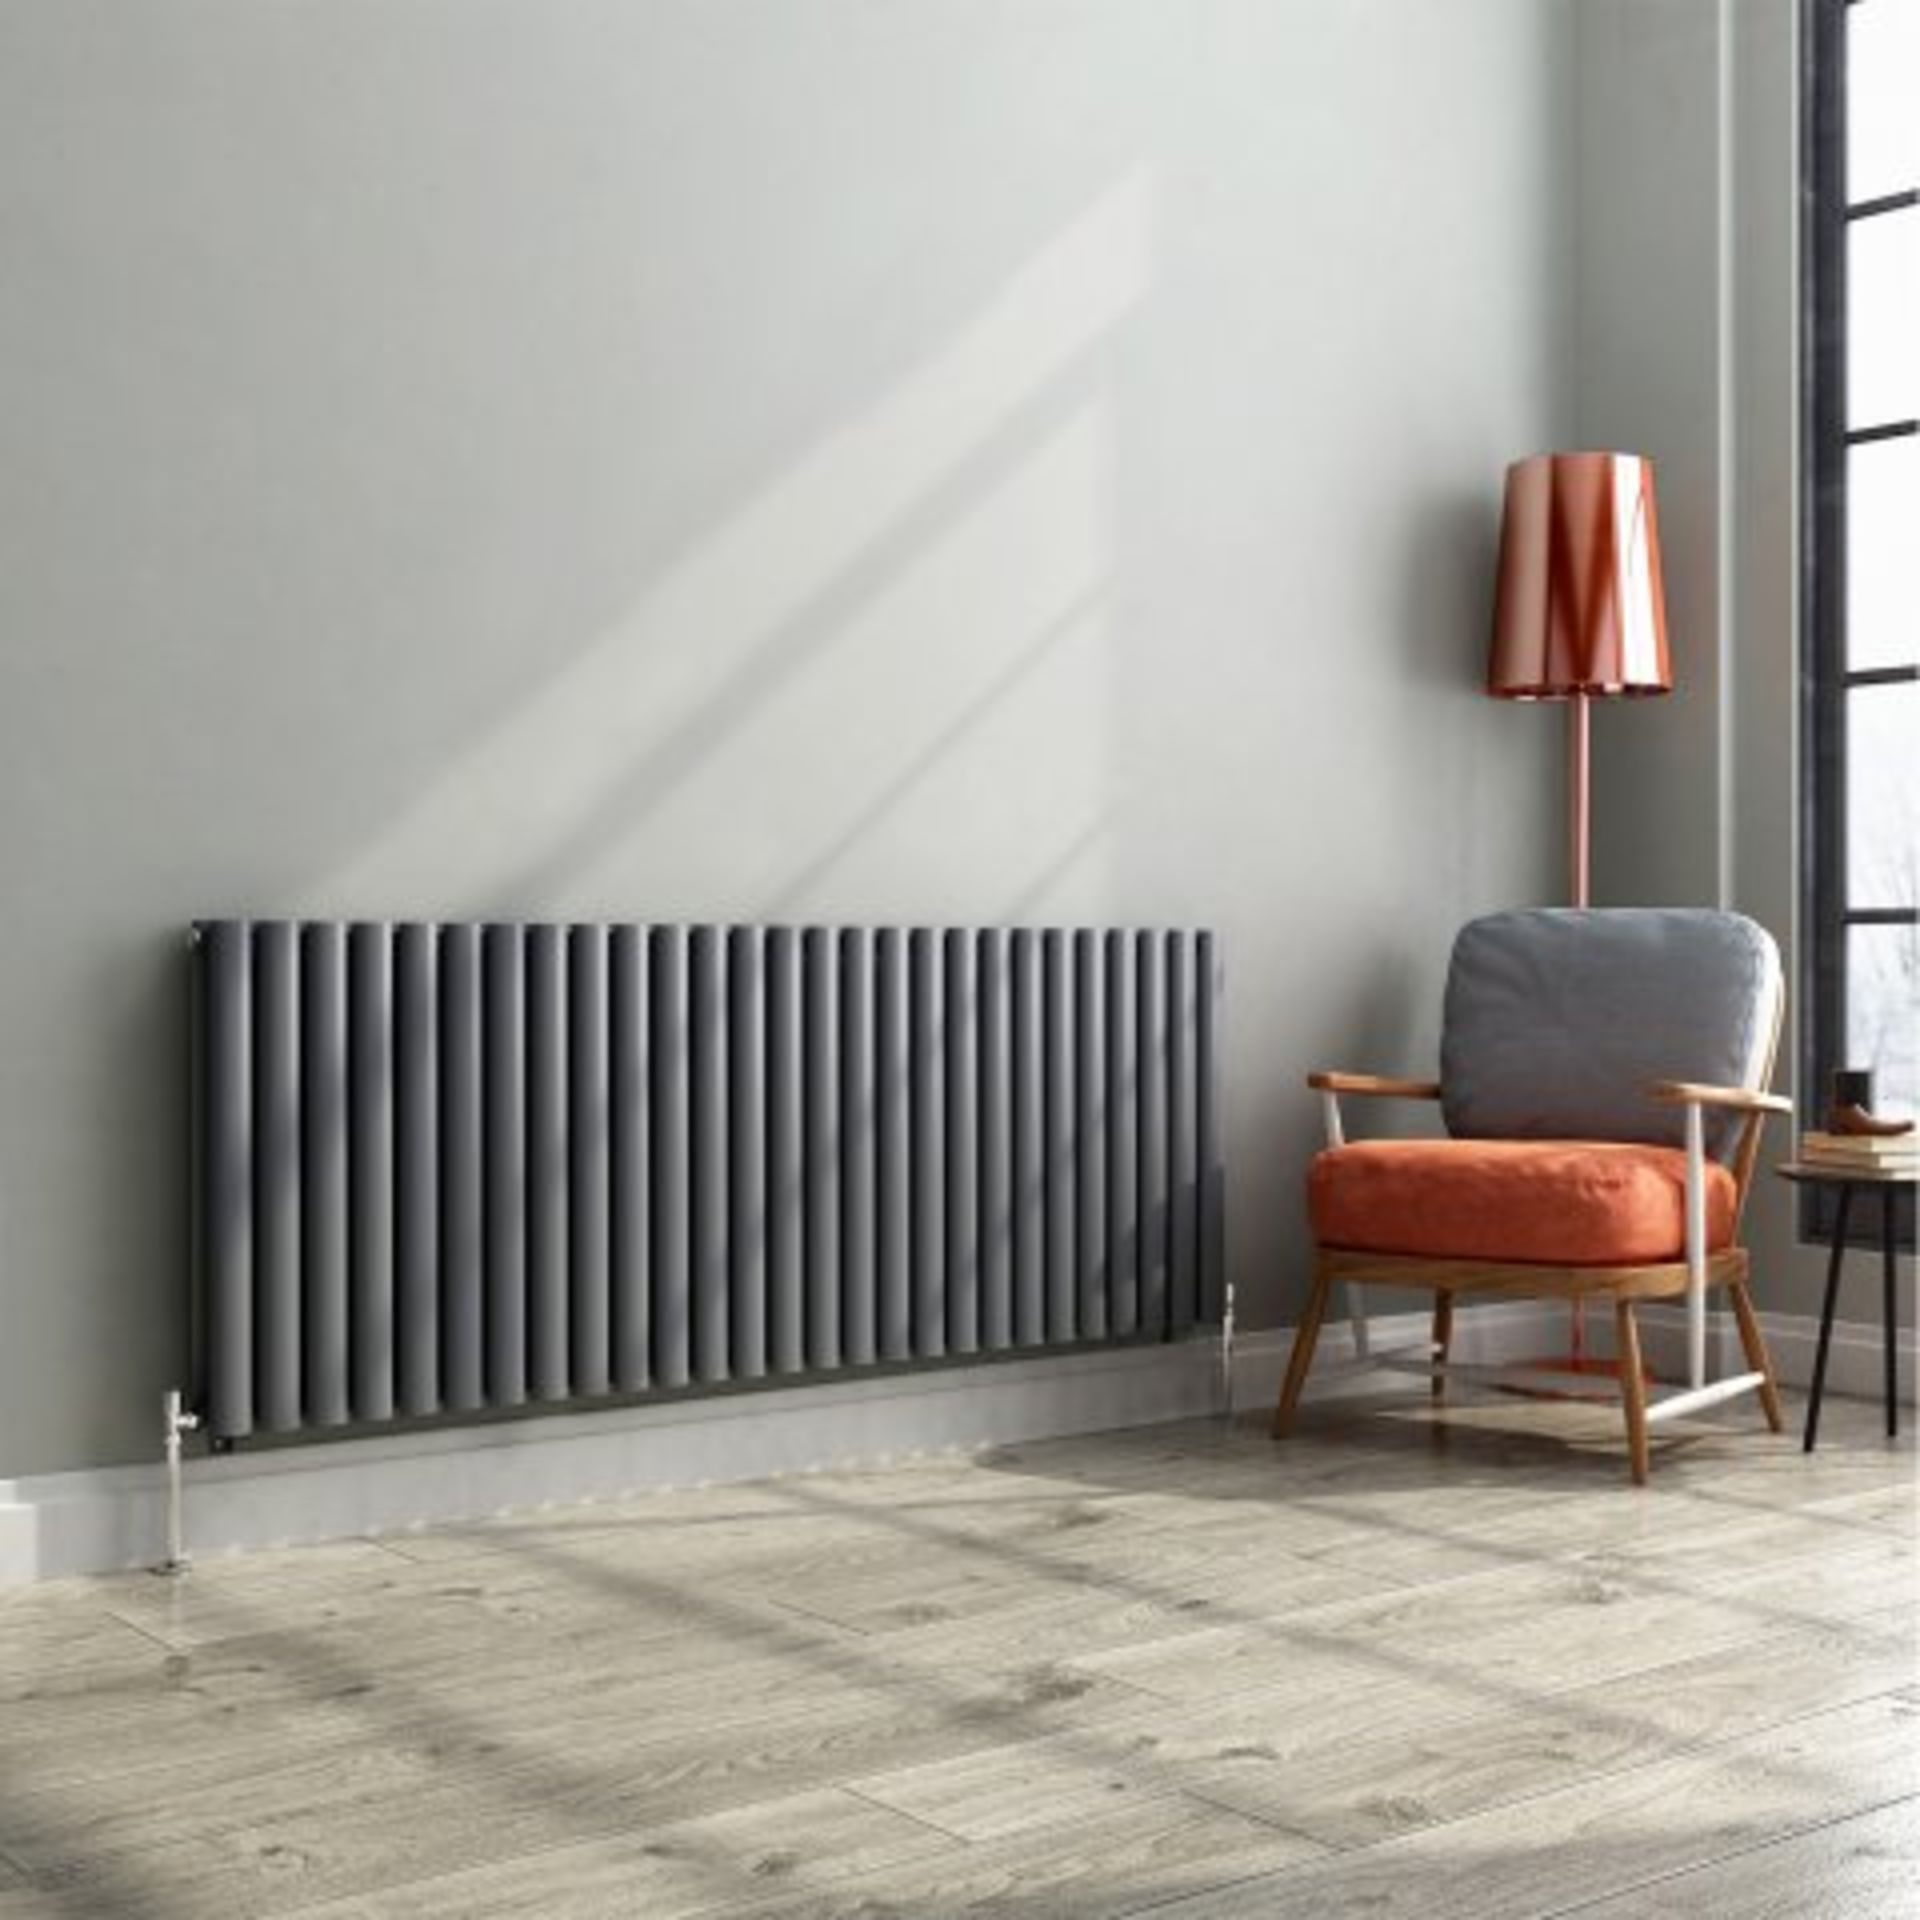 (H9) : 600x1620mm Anthracite Double Panel Oval Tube Horizontal Radiator - Huntington Finest. RRP £ - Image 4 of 5